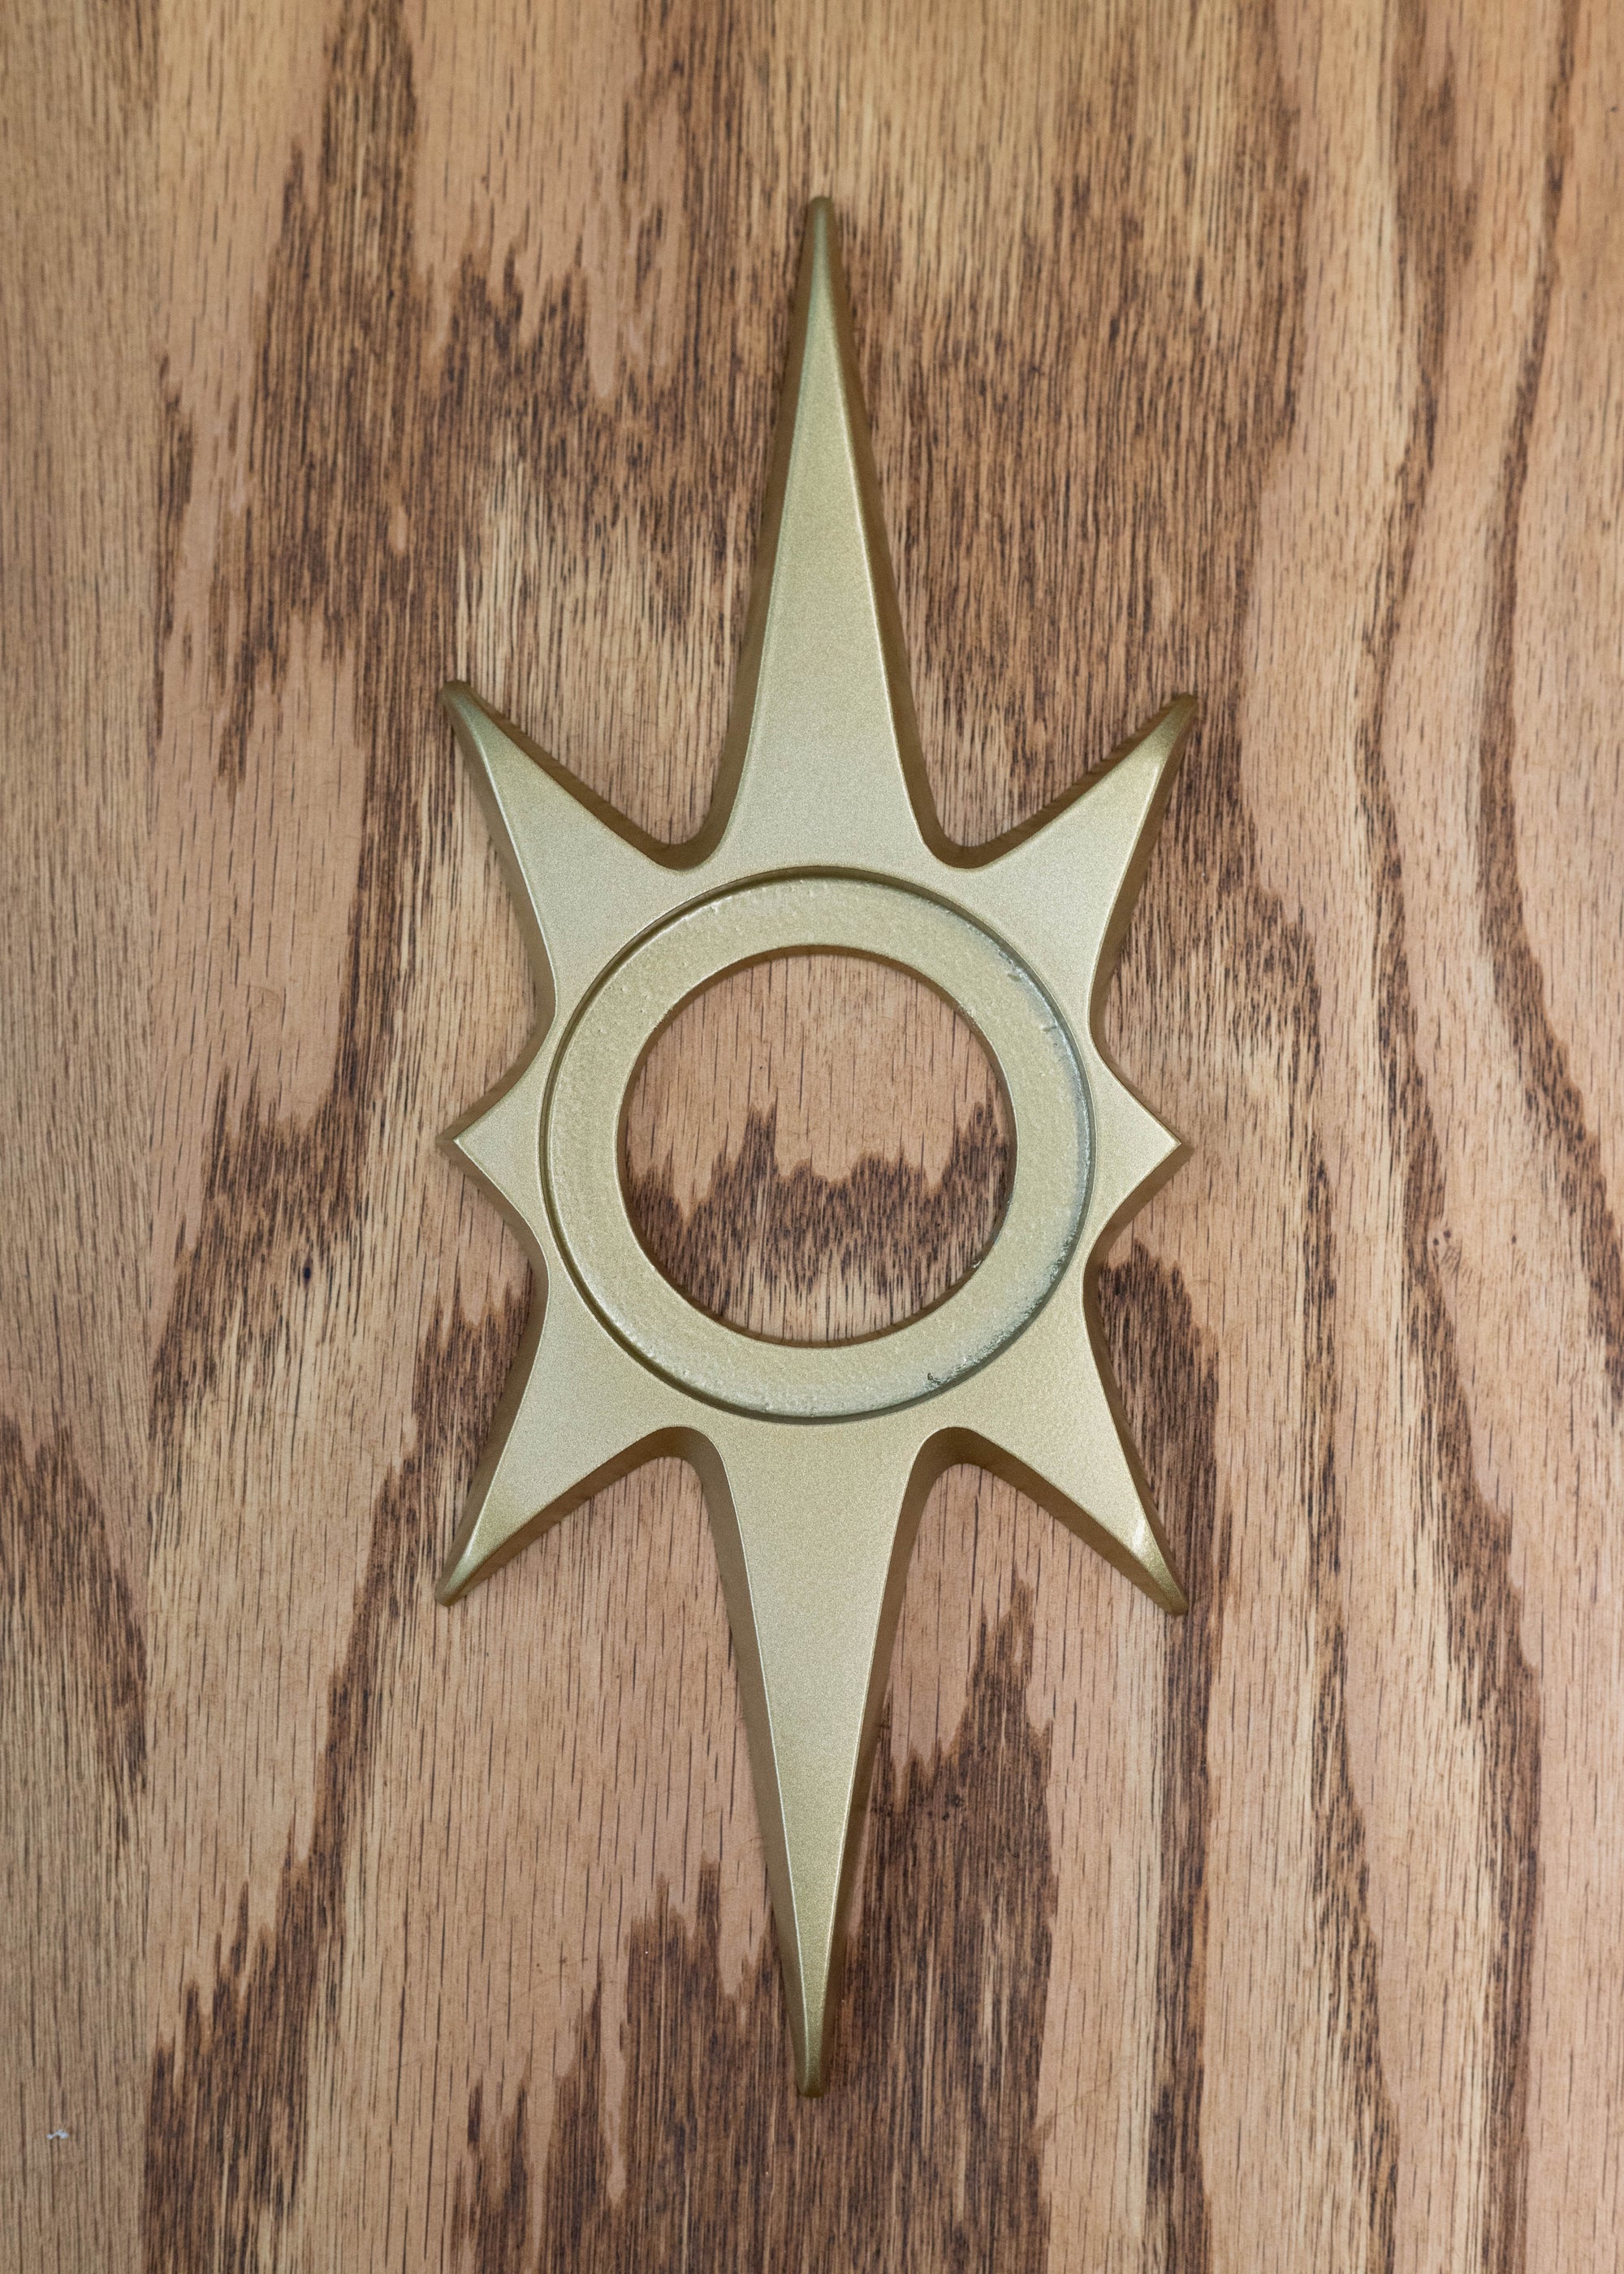 The gold starburst dooknob escutcheon. It has an inset open circle in the center where the doorknob sits and attaches to the door. The gold powder coating is a nice smooth finish. There's a bit of shine, but it's not completely glossy. 